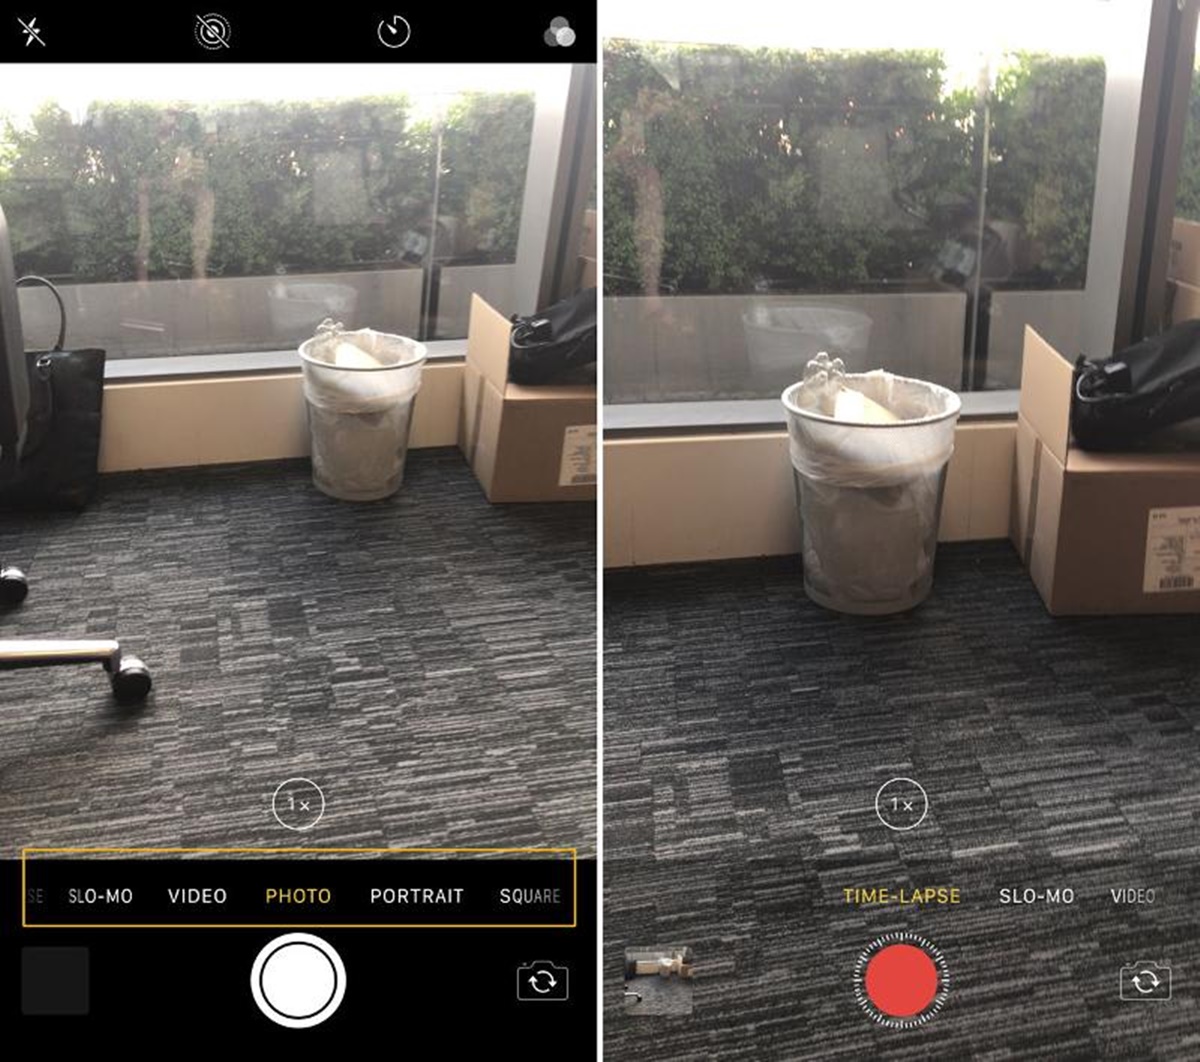 How To Time-Lapse A Video On iPhone